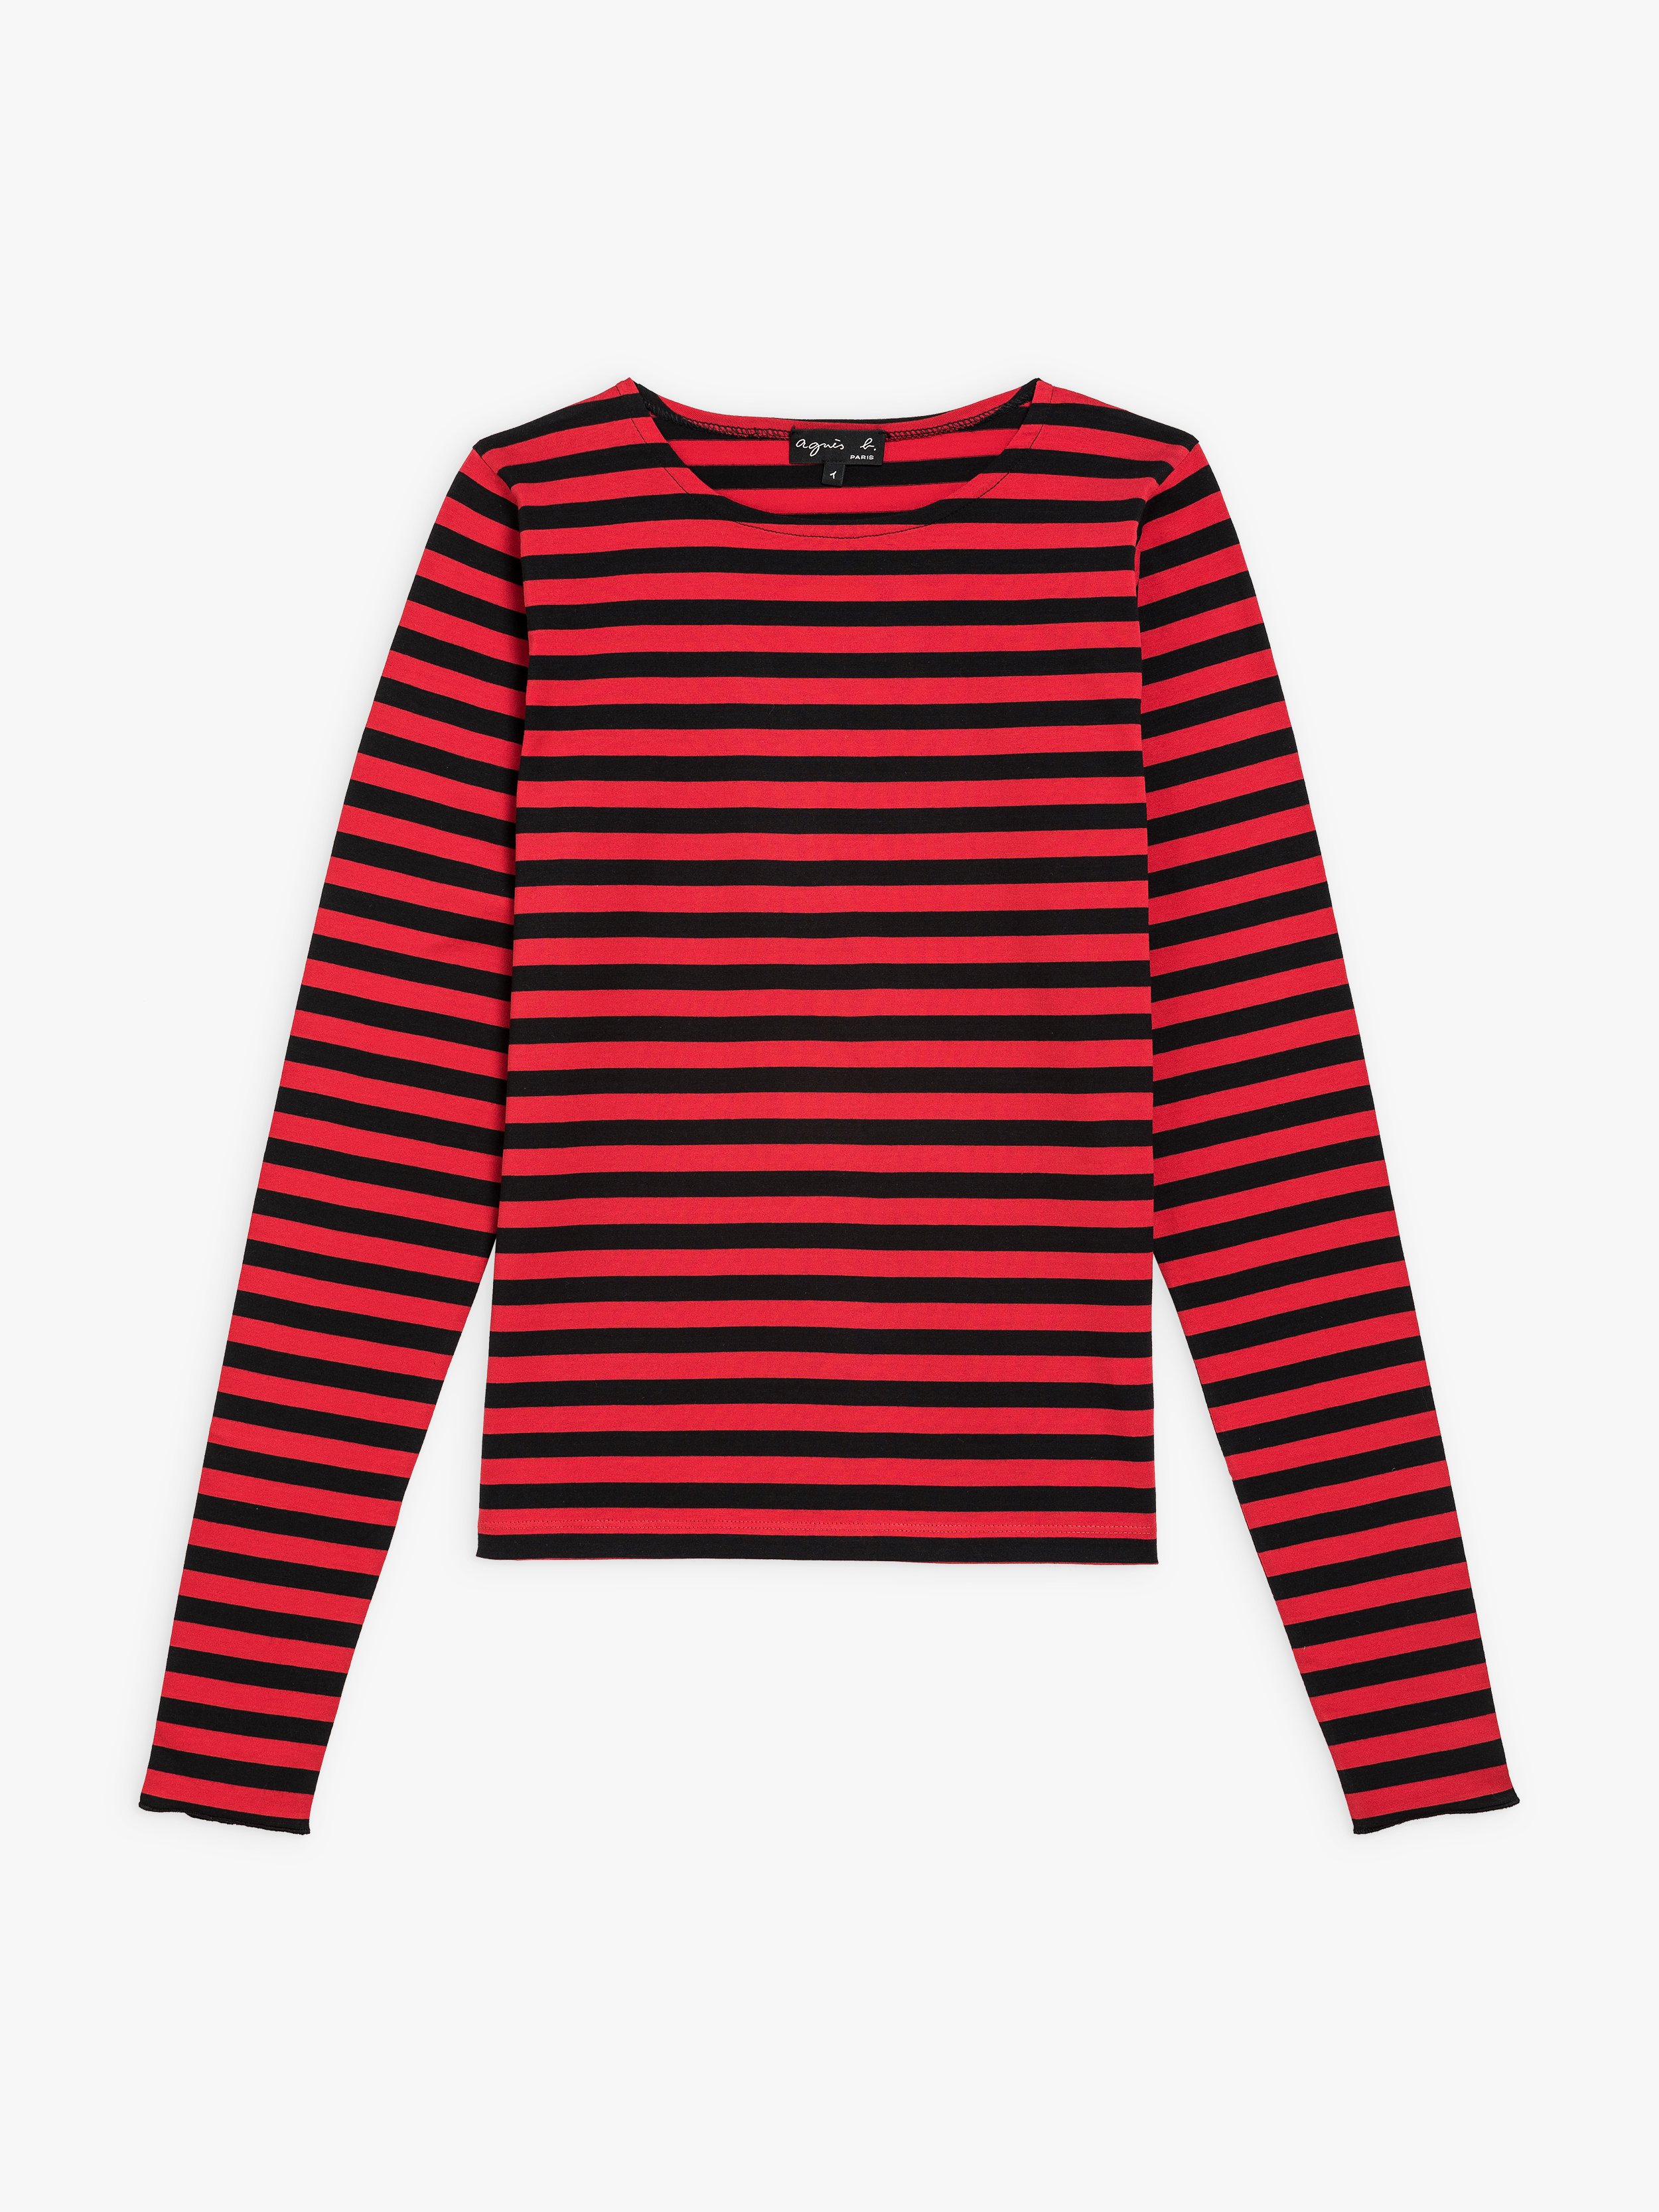 striped red and black shirt